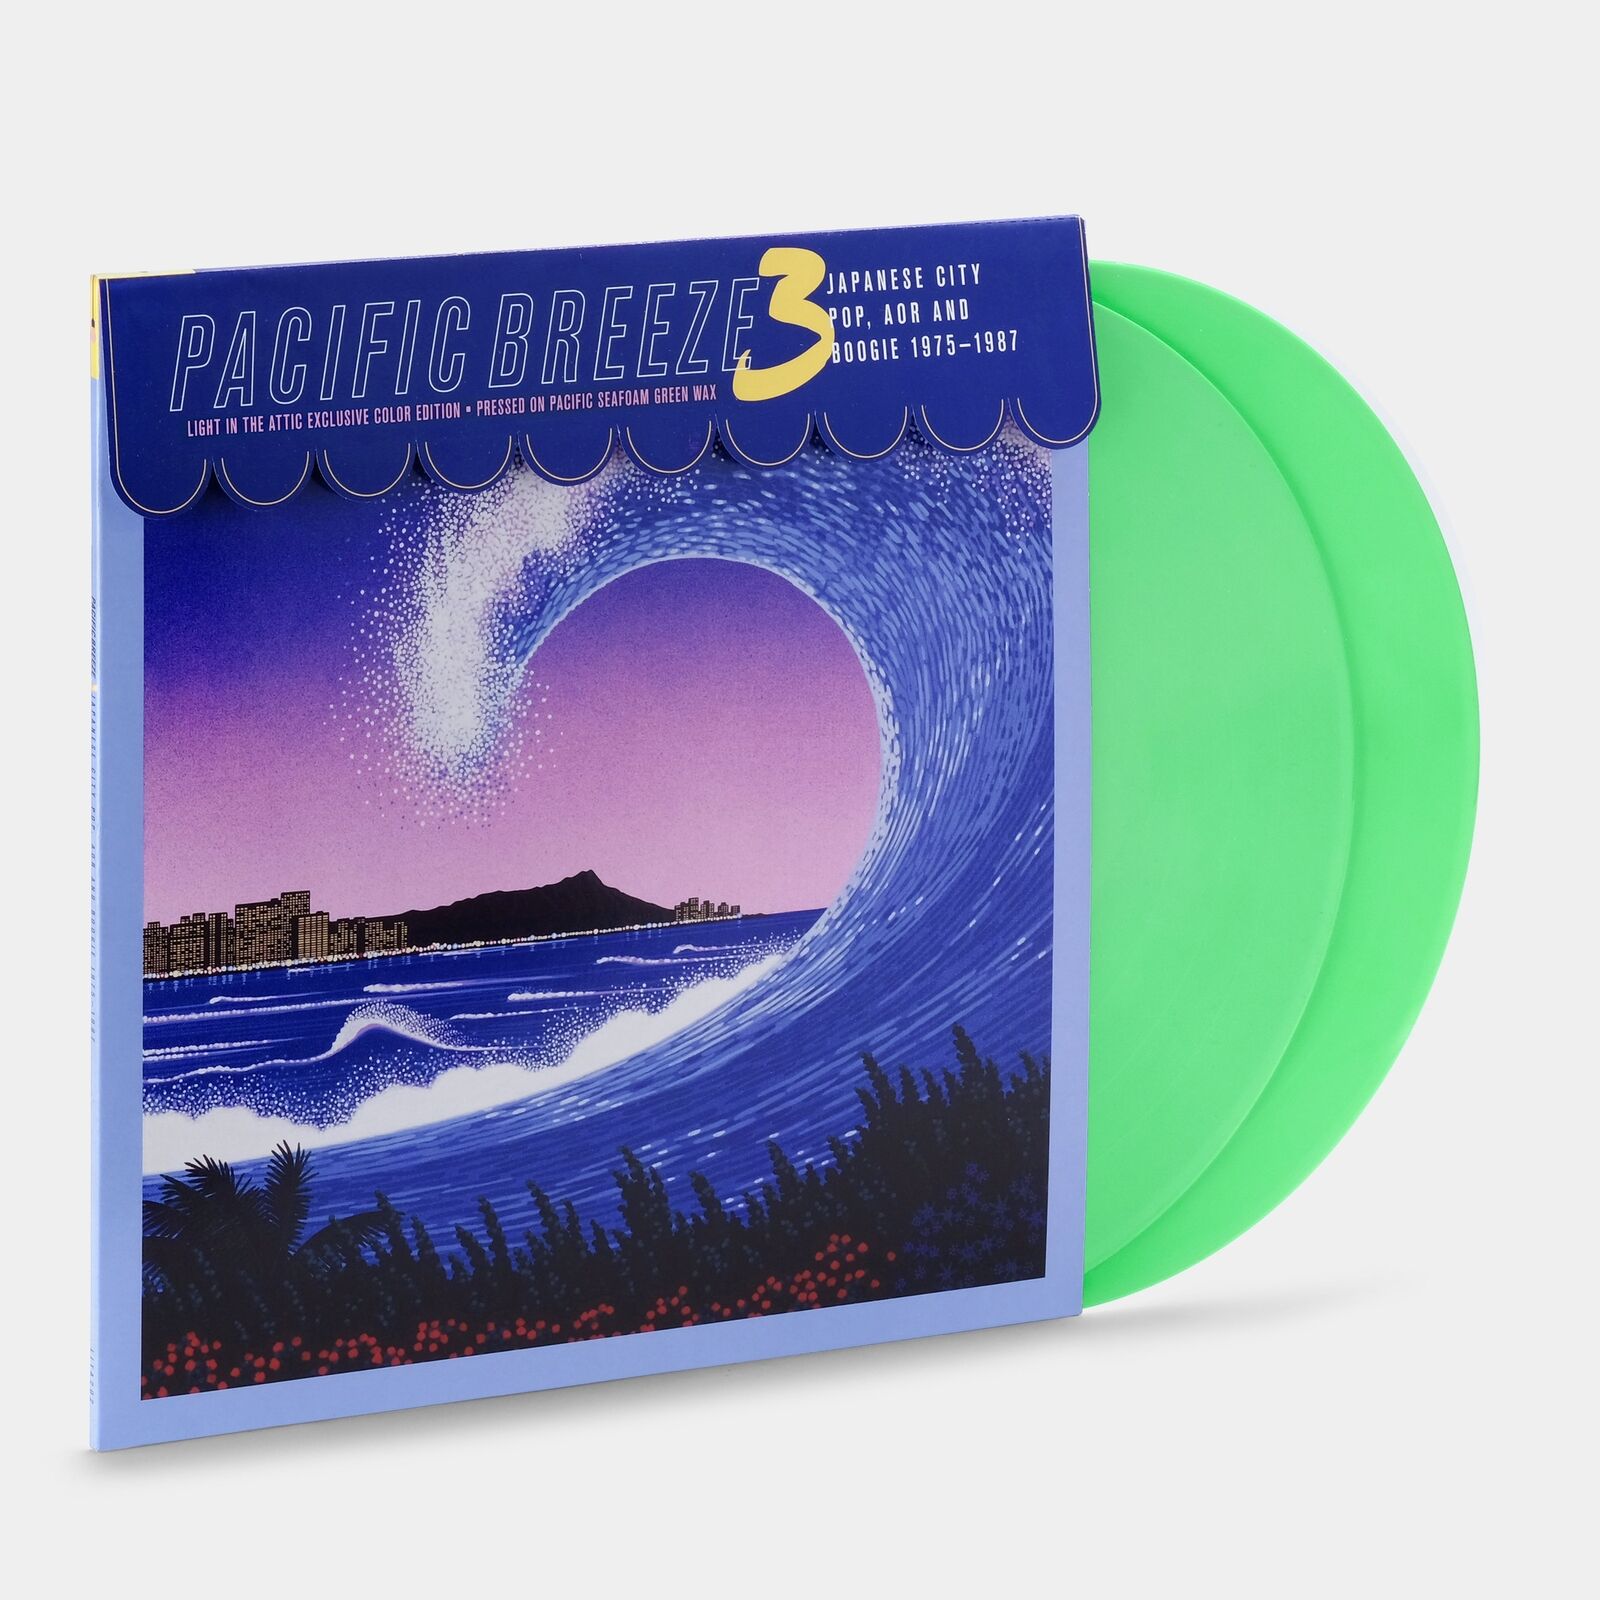 Pacific Breeze 3: Japanese City Pop, AOR And Boogie 1975-1987 2xLP Pacific Seafo